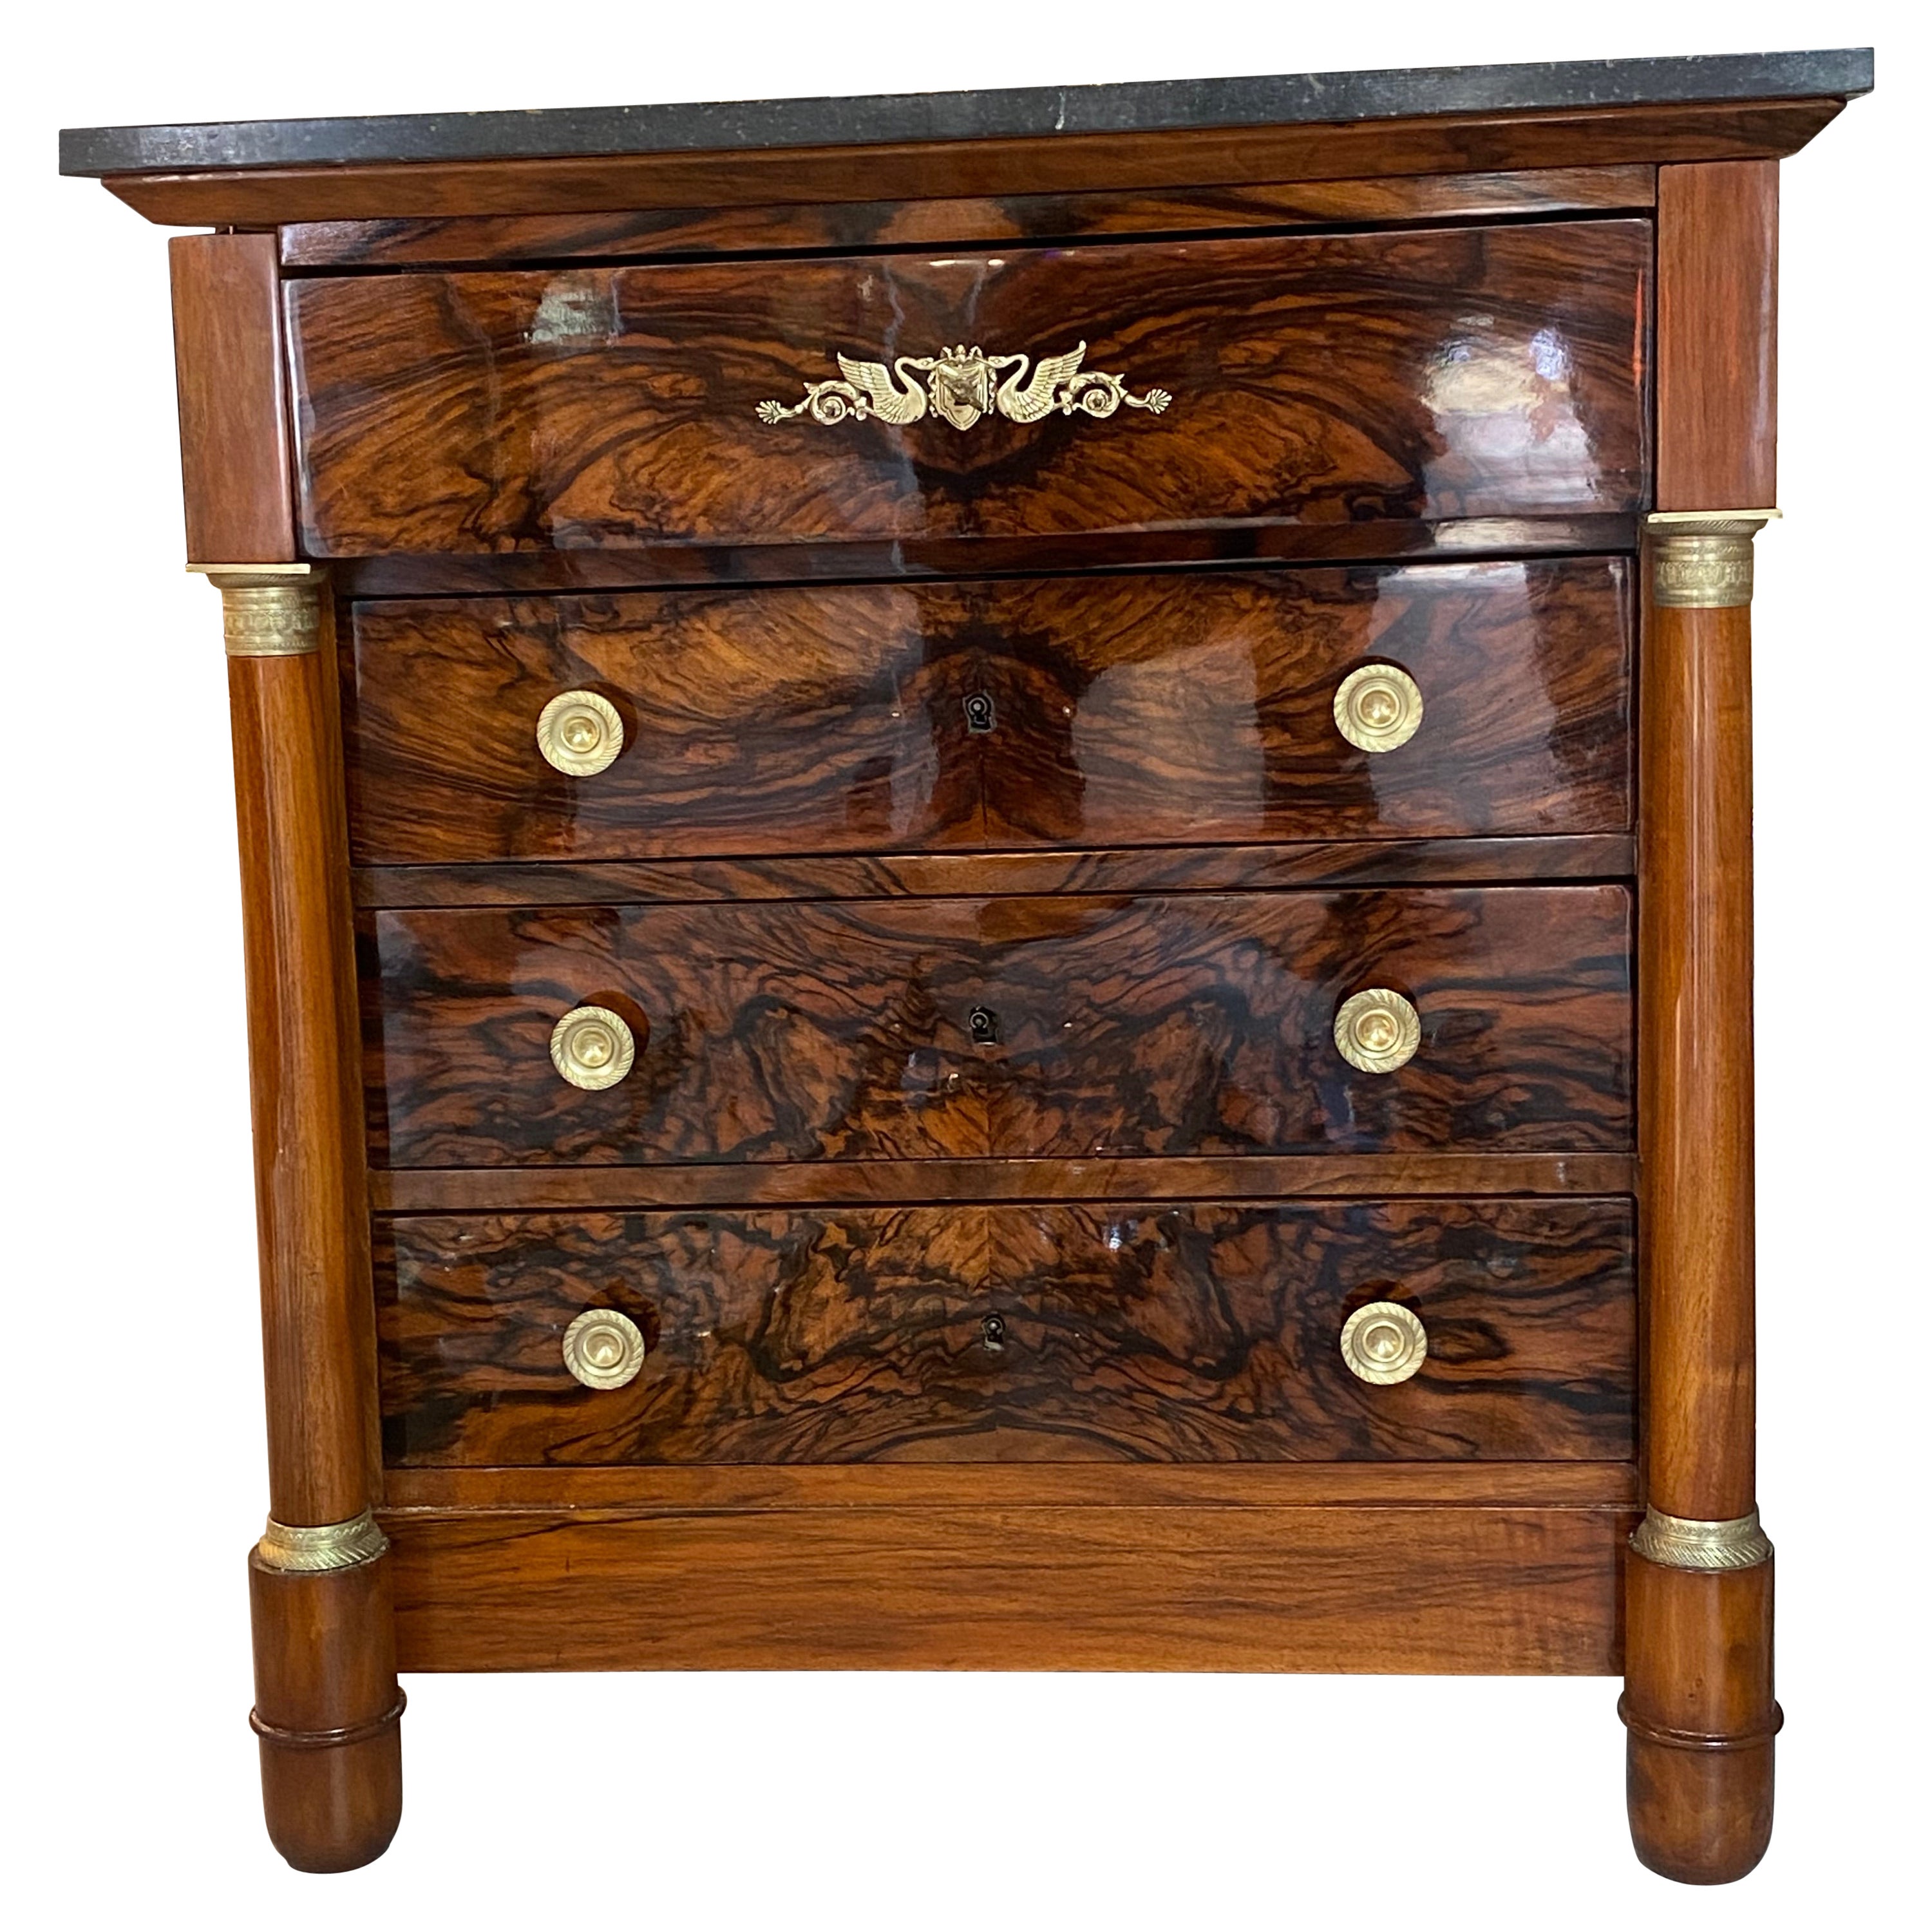 1800's Empire mahogany chest of drawers 